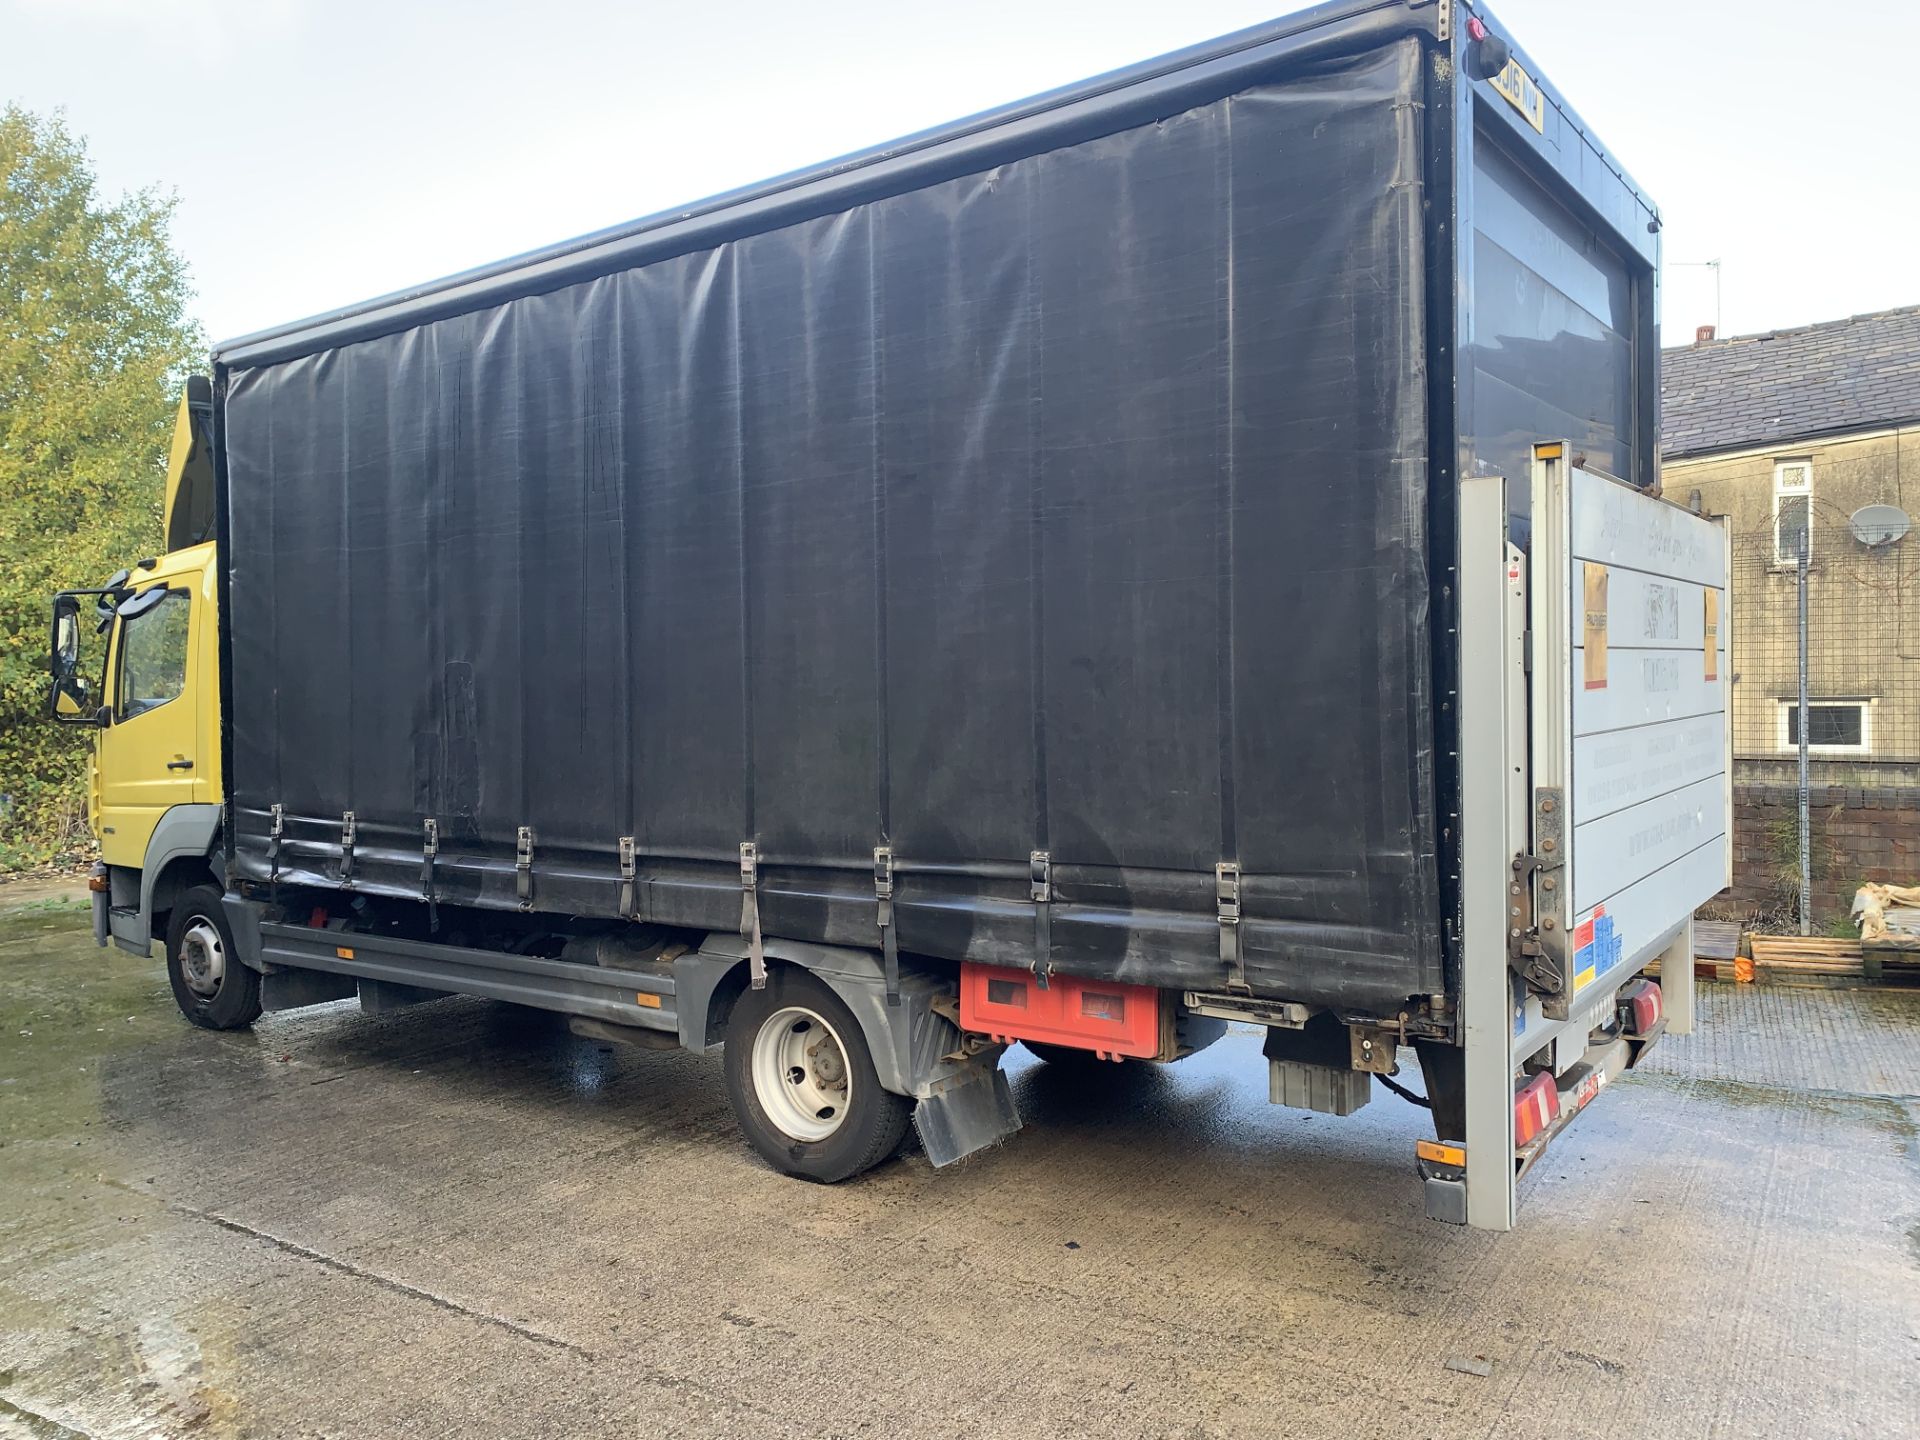 Mercedes Benz Atego 816 Curtain Sided Wagon, Registration Number SJ16 NWM, - Image 11 of 14